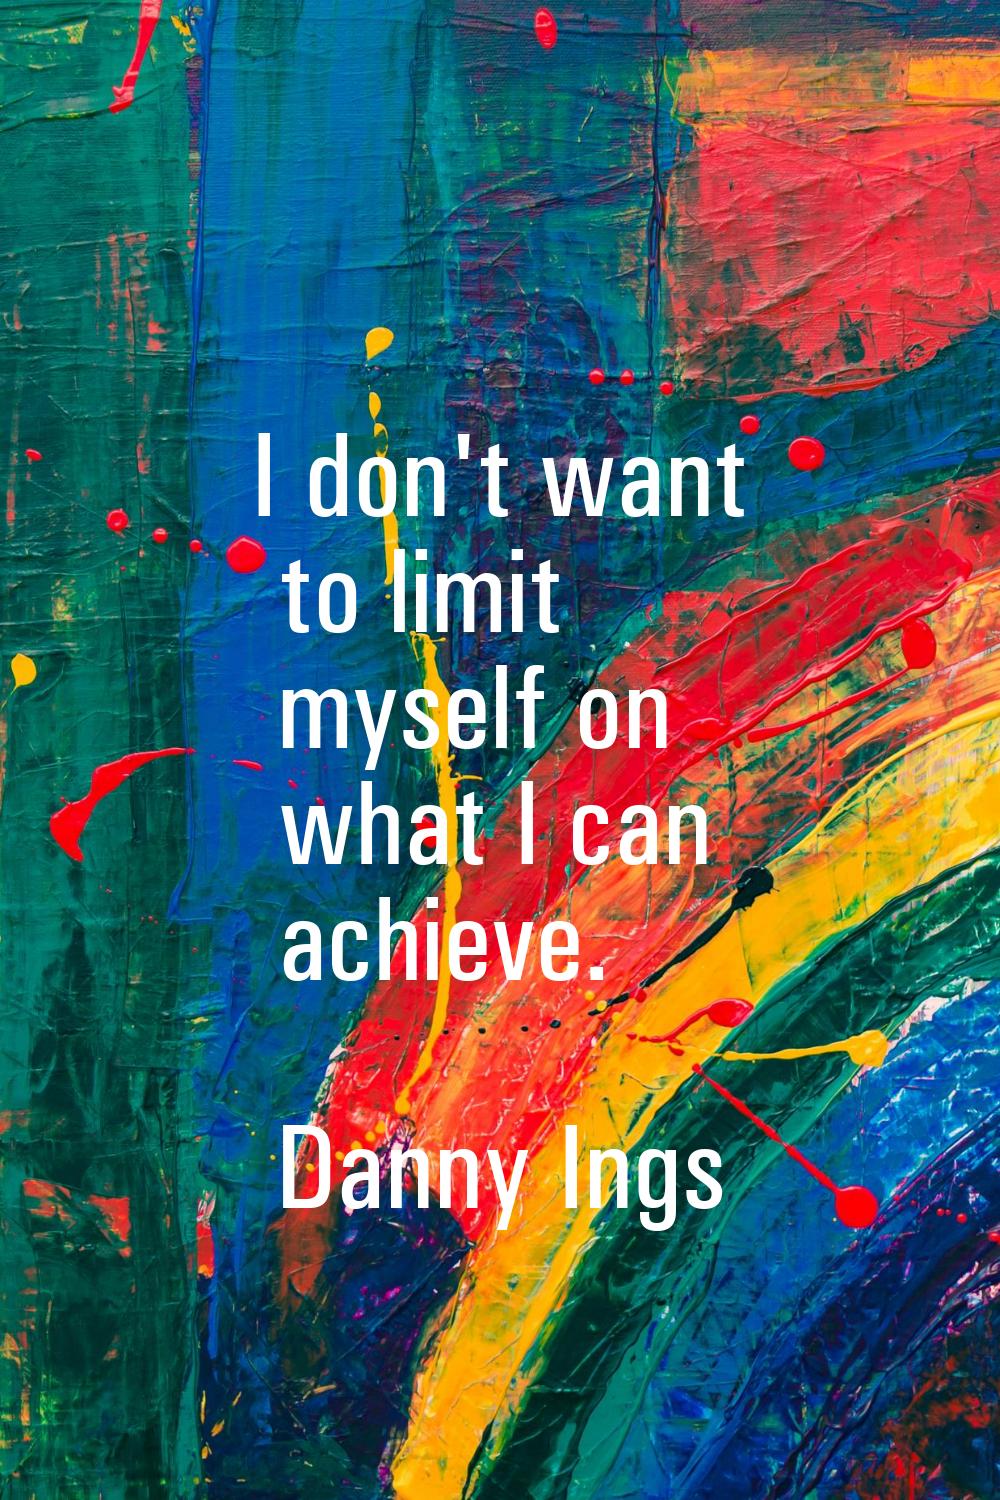 I don't want to limit myself on what I can achieve.